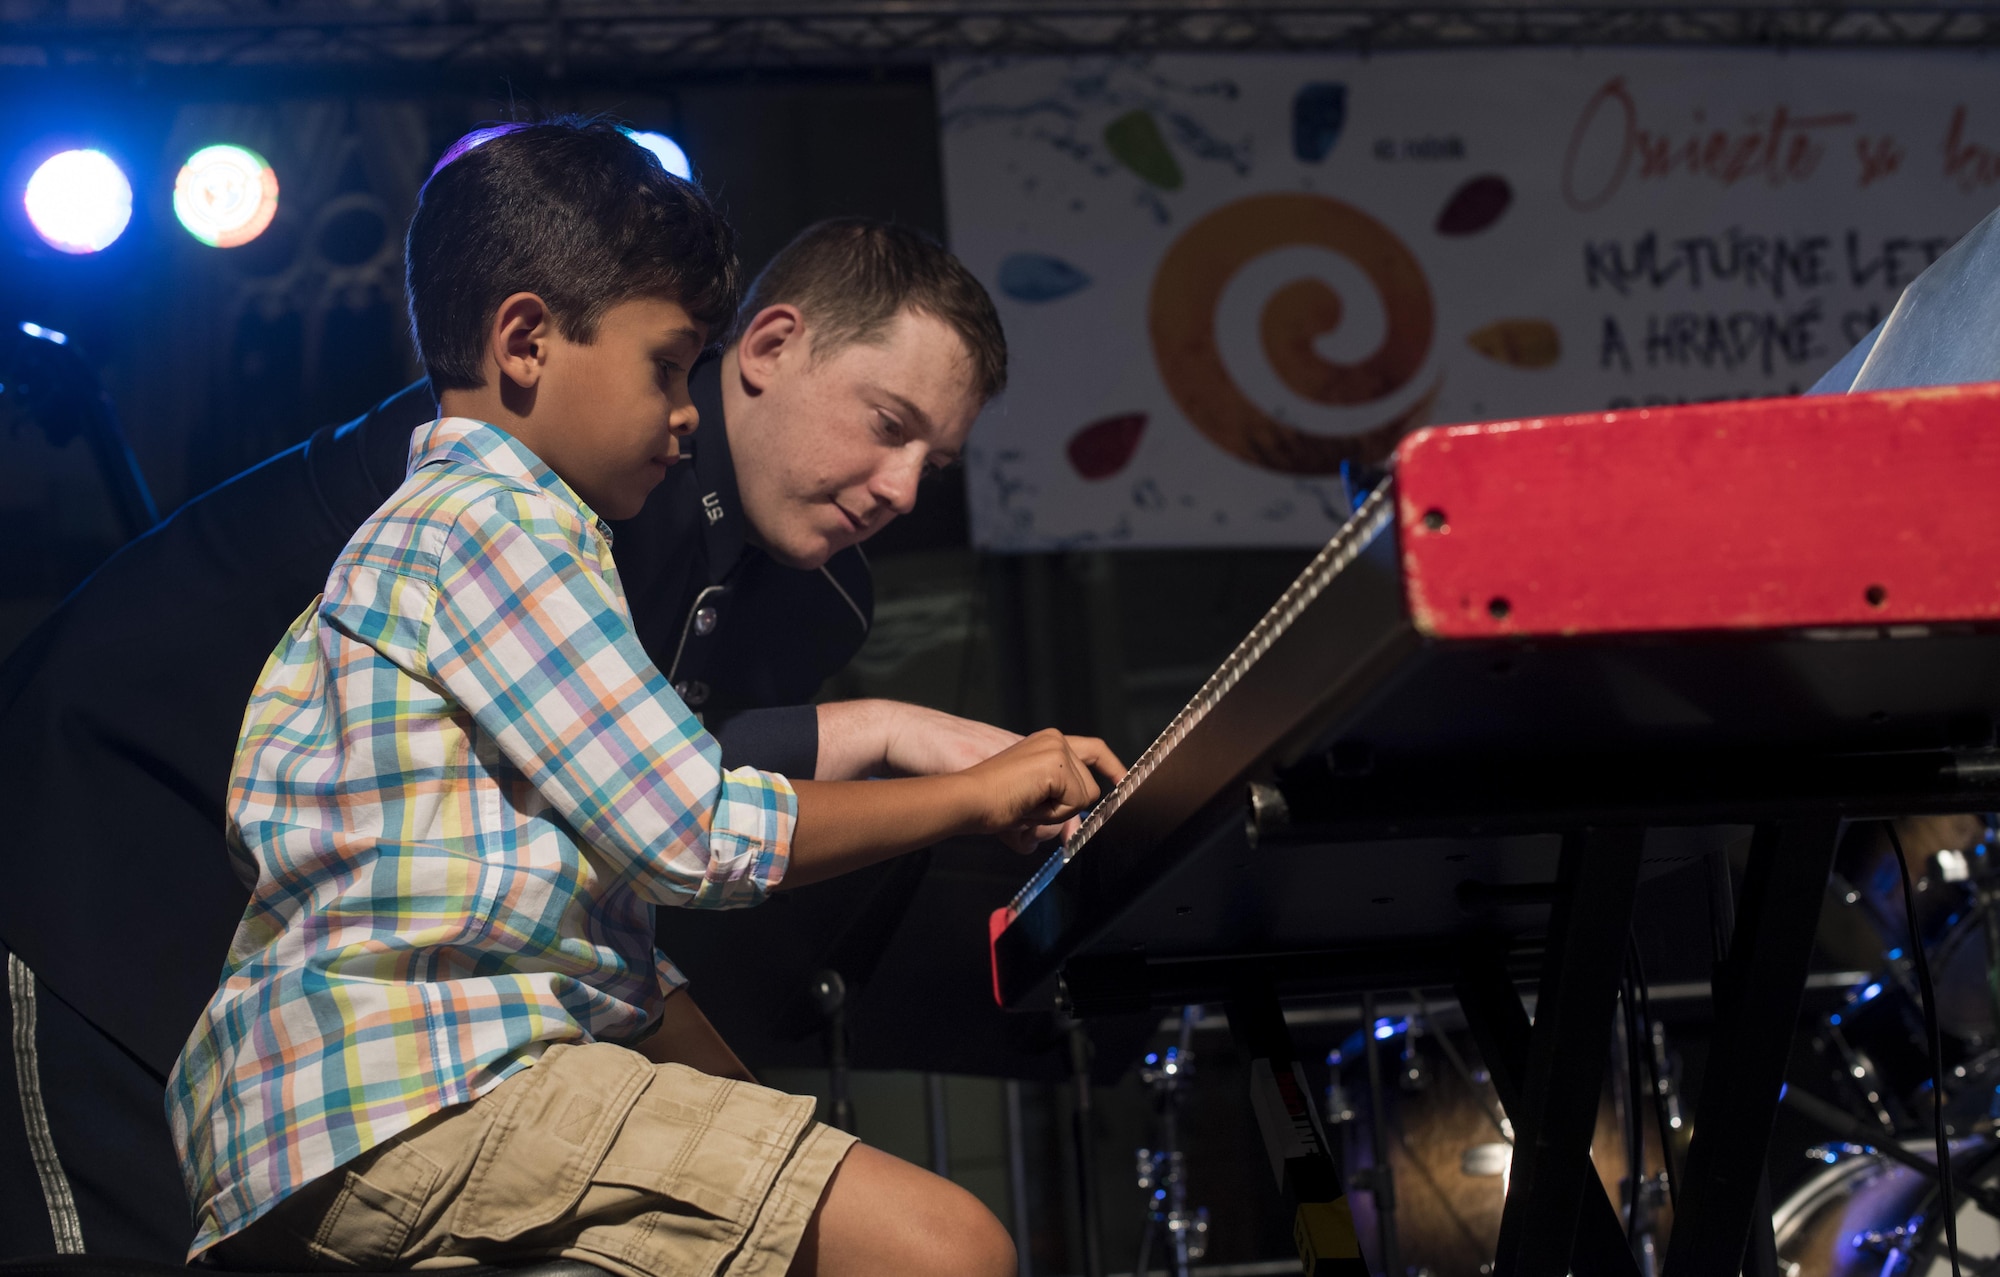 U.S. Air Force Staff Sgt. Justin Cockerham, U.S. Air Forces in Europe piano, plays “Ode to Joy” with a child after performing for the 73rd anniversary of the Slovak National Uprising in Bratislava, Slovakia, Aug. 30, 2017. The USAFE band serves to increase cultural ties and to enhance the people-to-people relationship between the U.S. and Slovakia. (U.S. Air Force photo by Senior Airman Tryphena Mayhugh